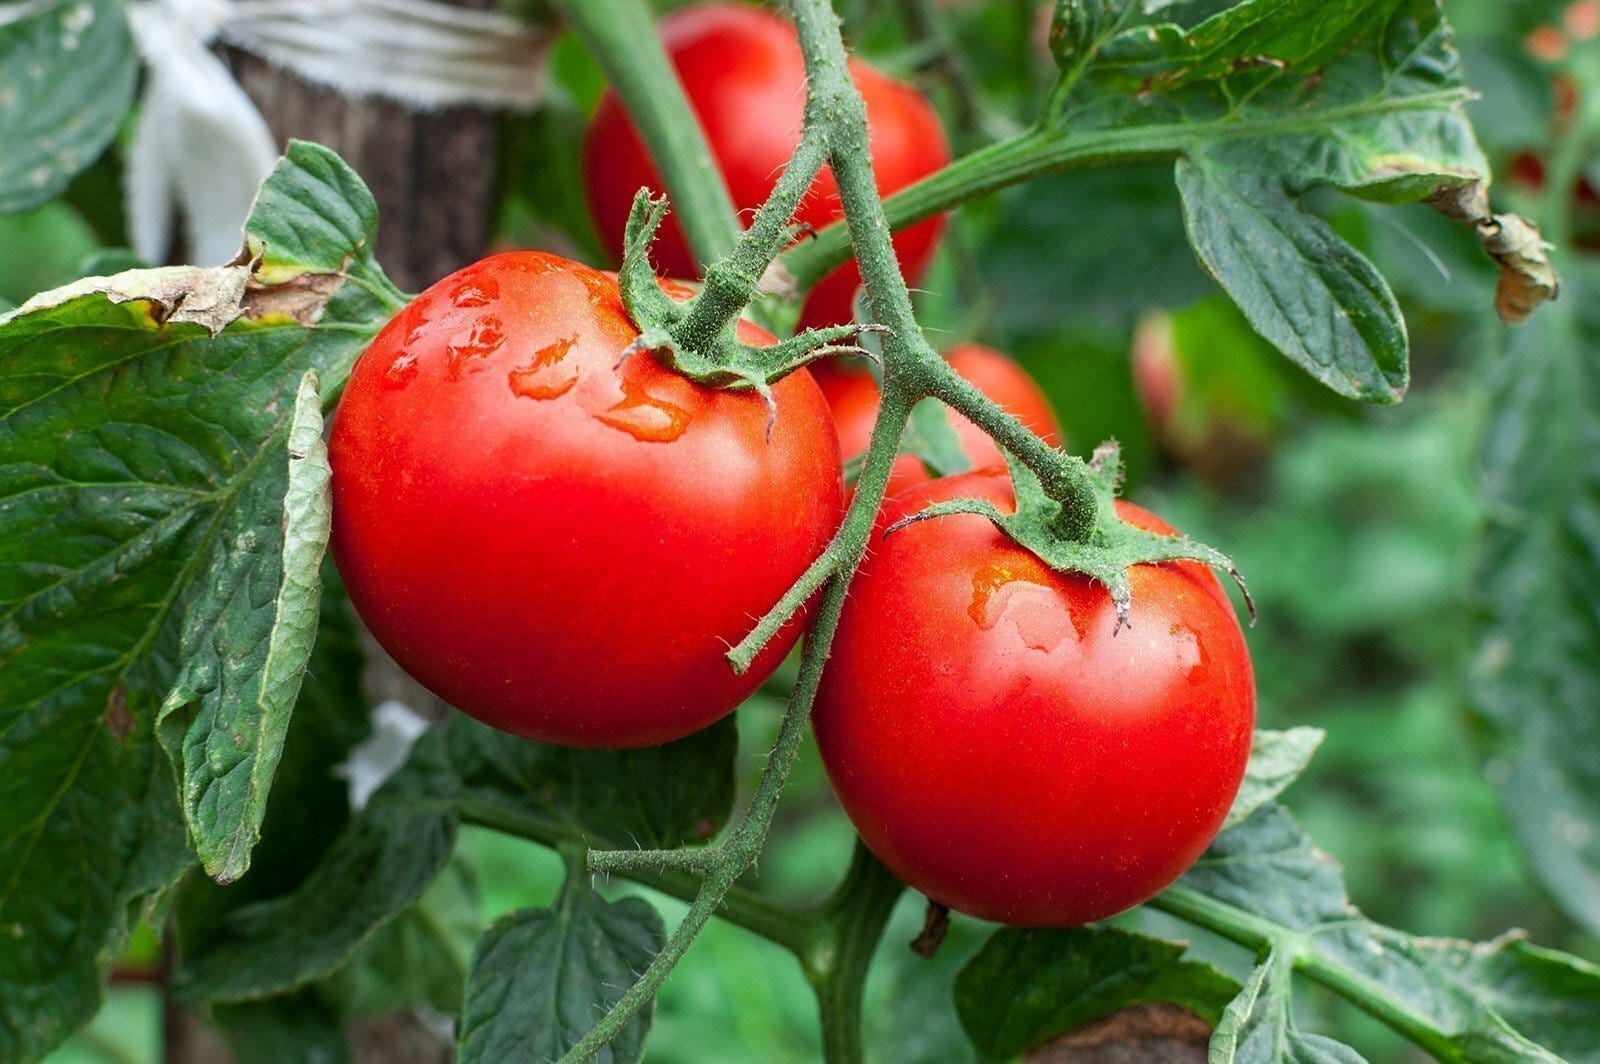 Gardening: Maximize the size of your tomatoes by following these helpful pointers